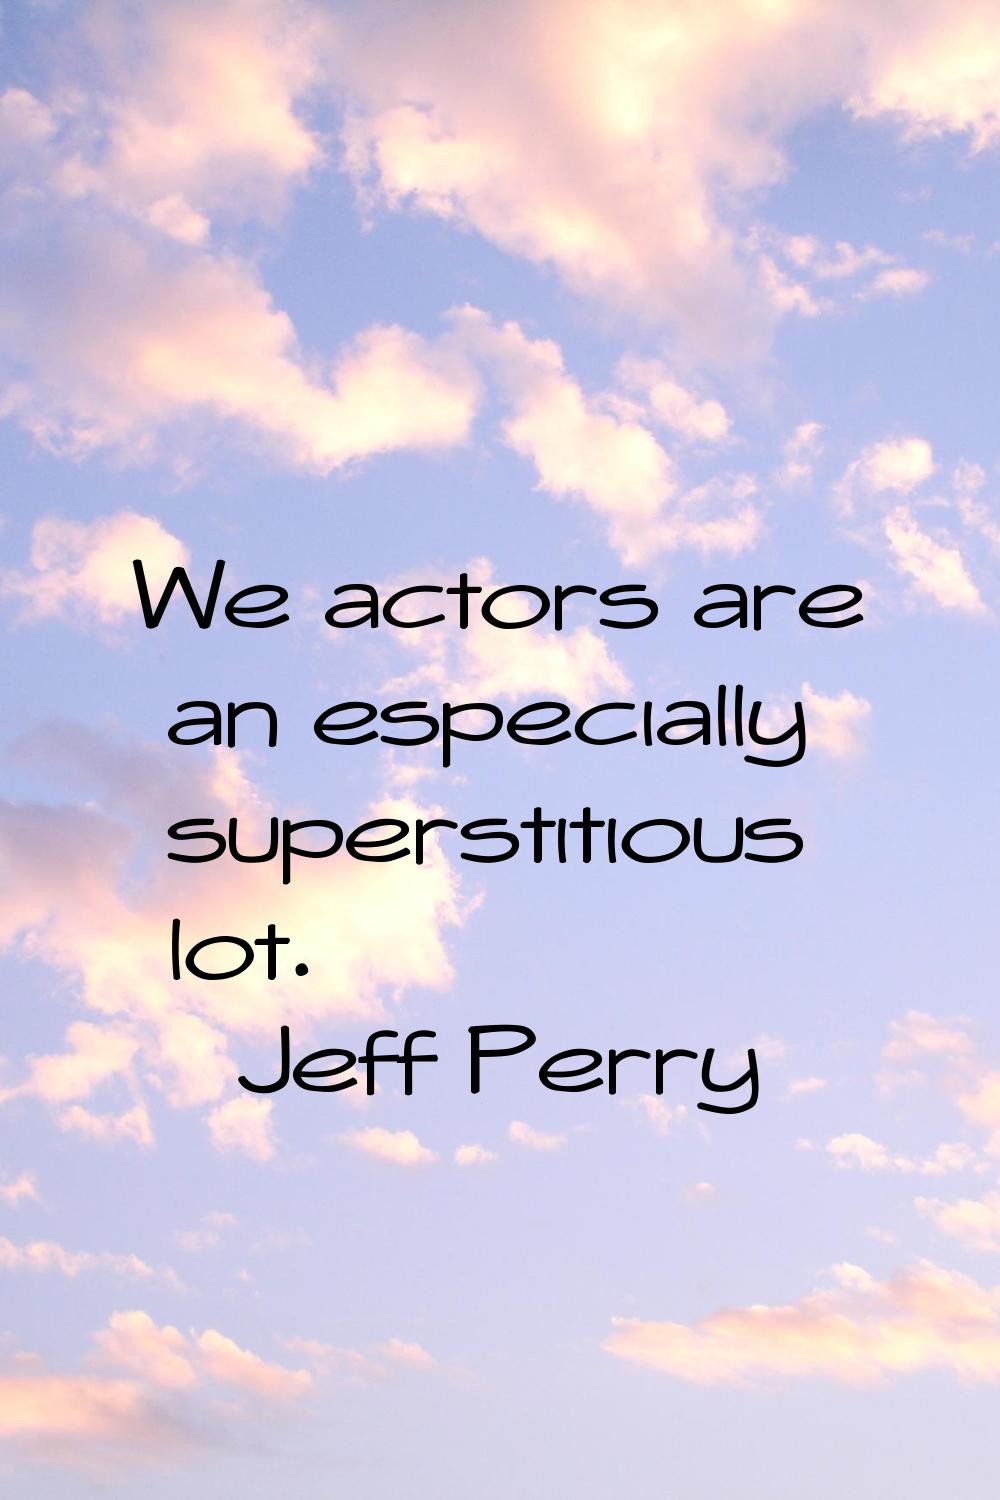 We actors are an especially superstitious lot.